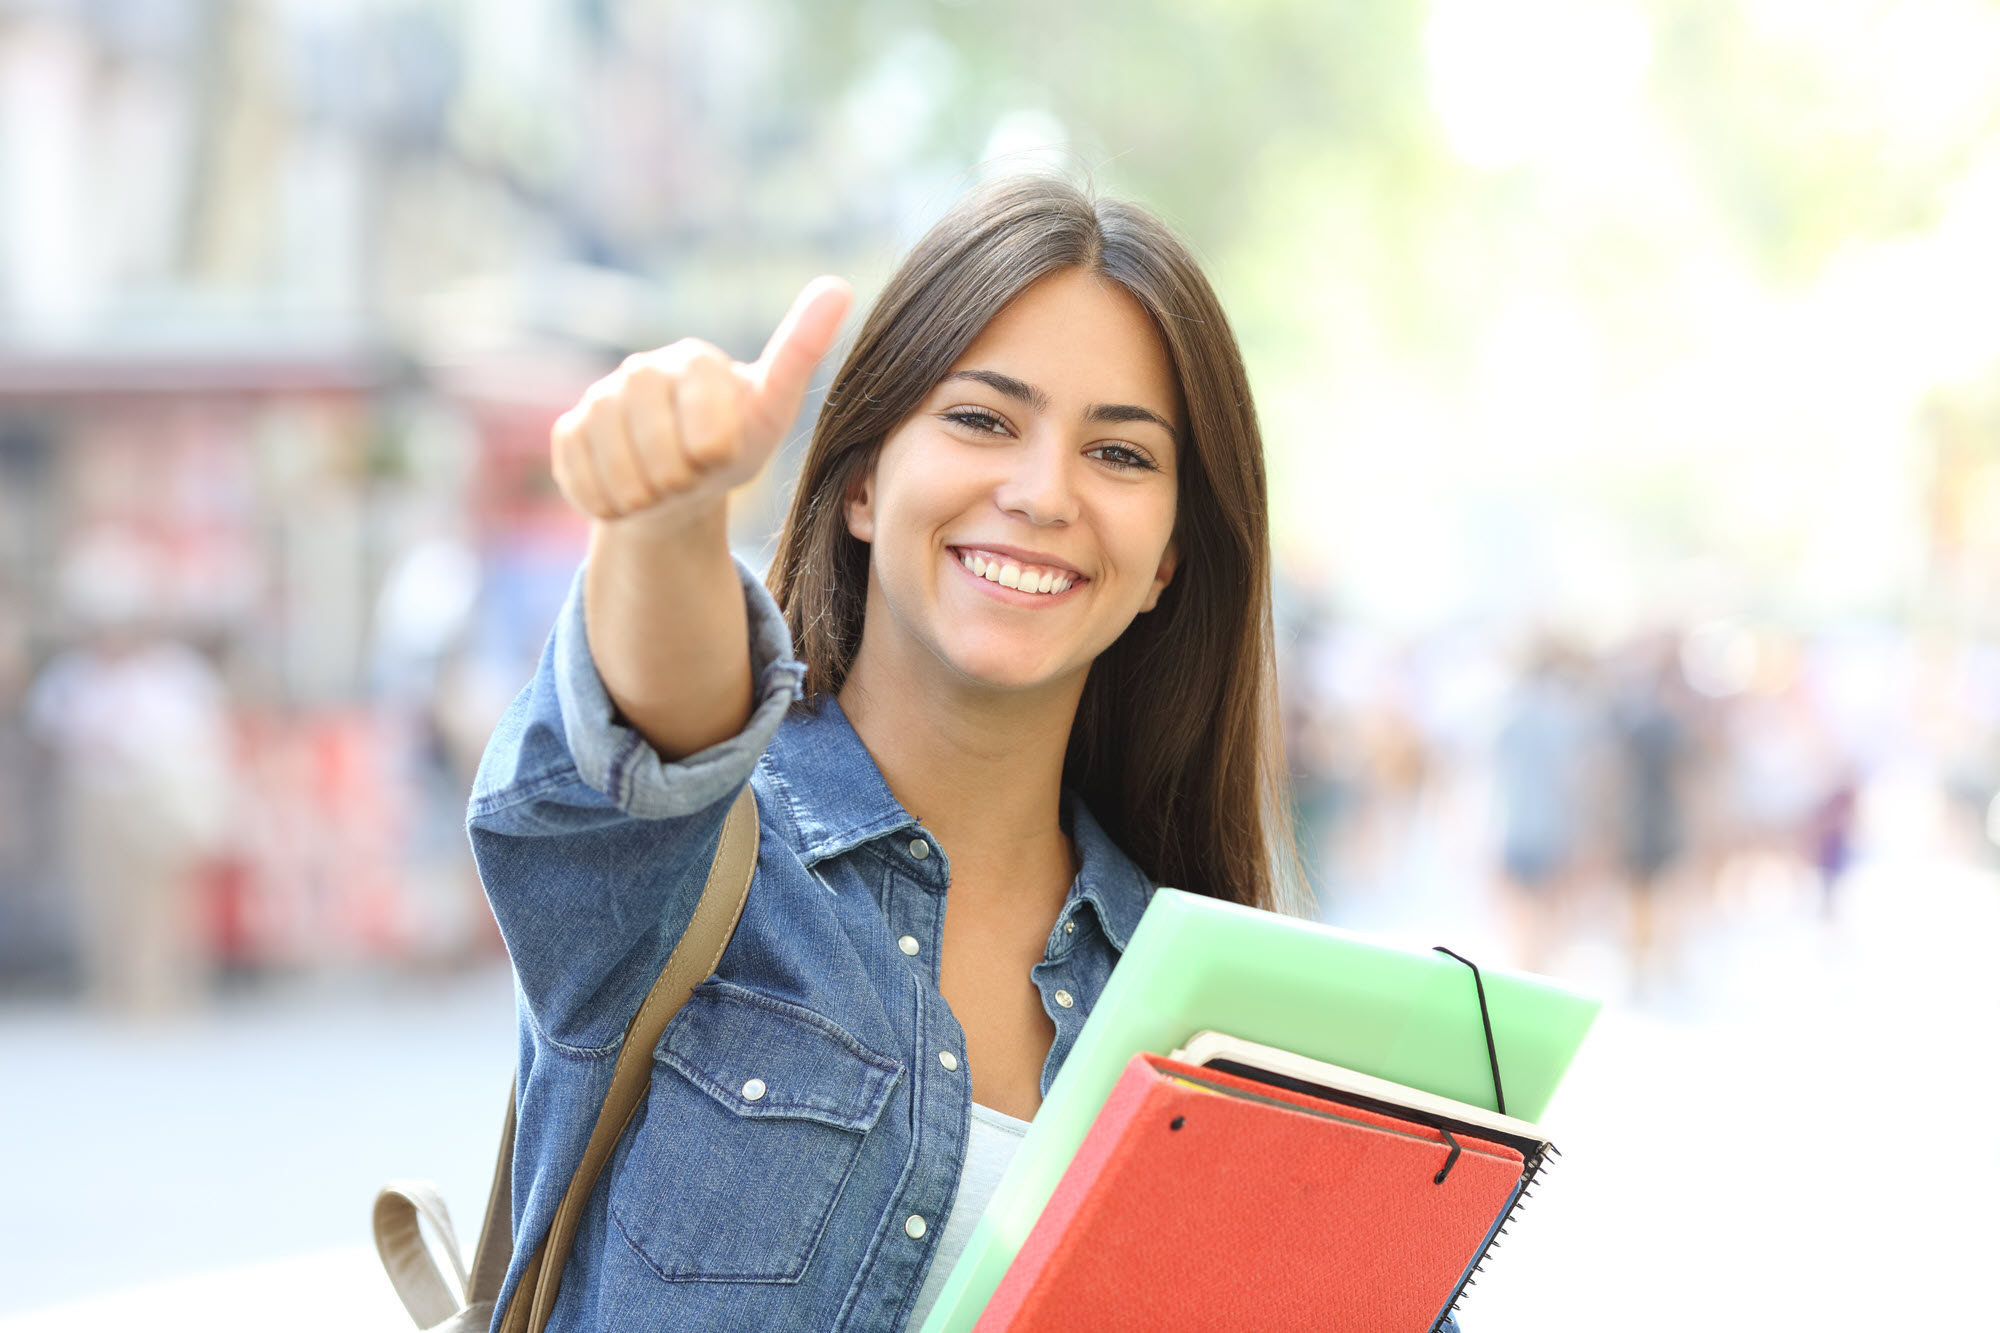 high school girl holding books giving a thumbs up